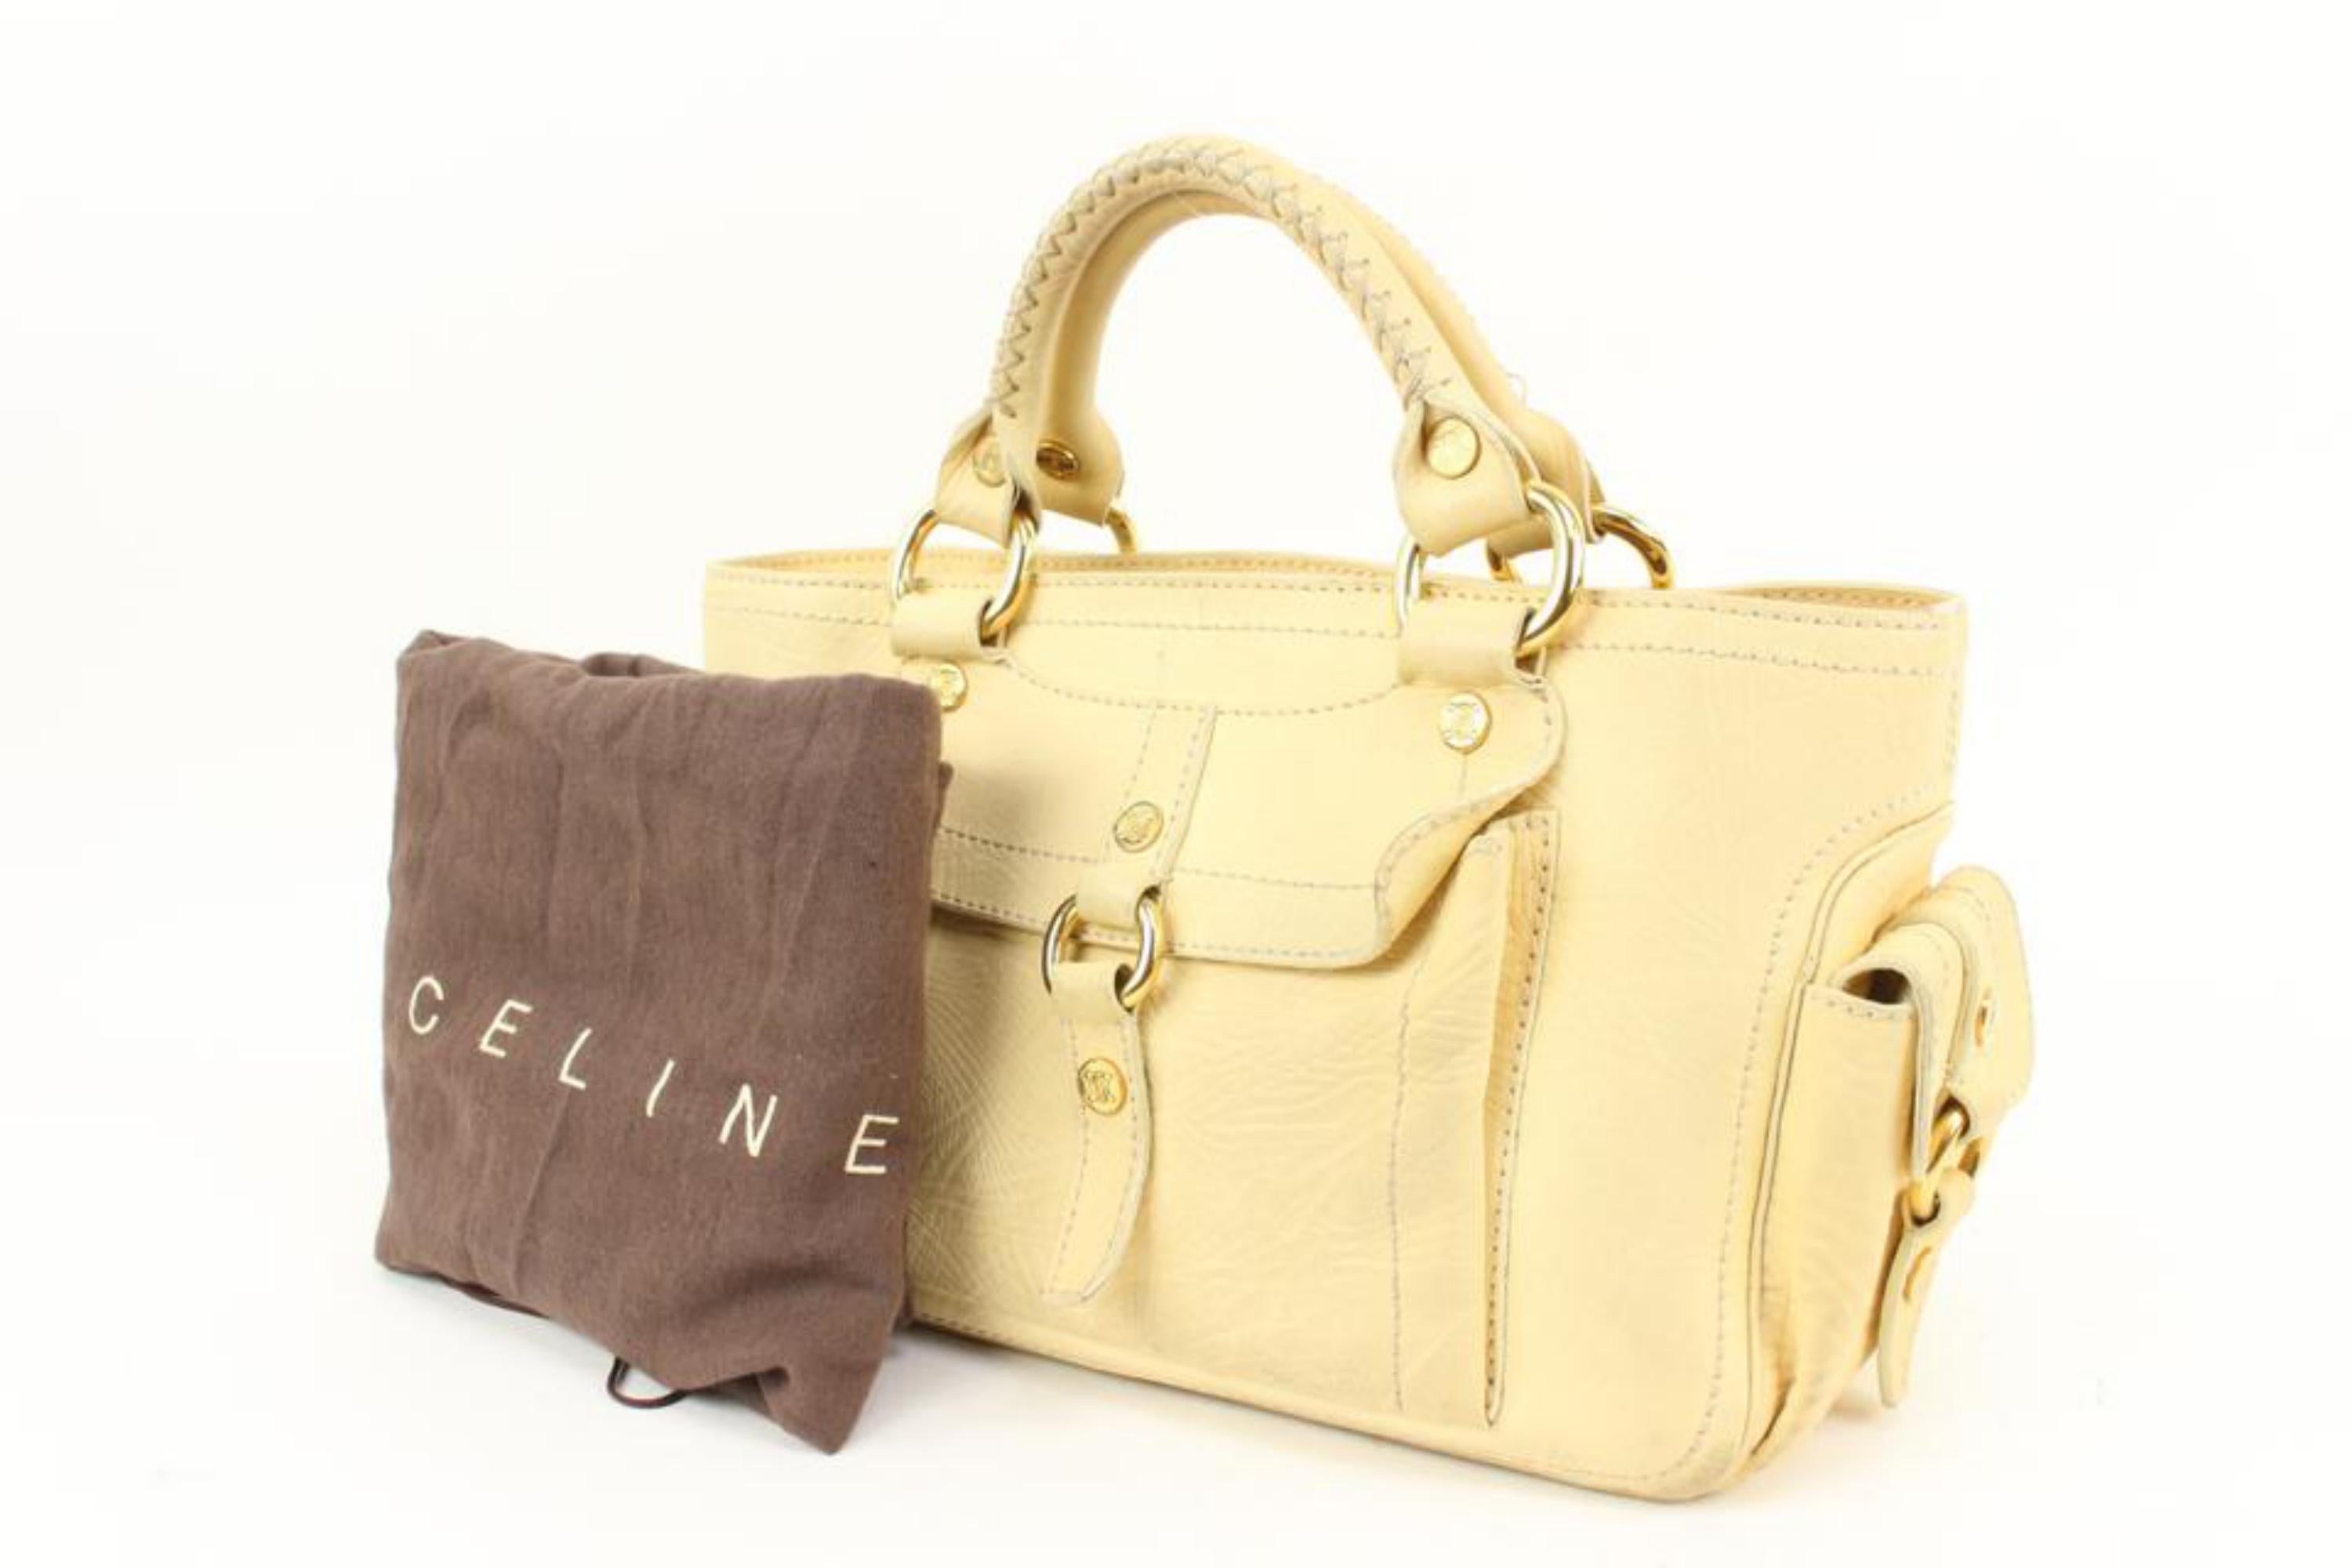 Céline Cream Leather Boogie Tote Bag 91ce39s
Date Code/Serial Number: GAS0/55
Made In: Italy
Measurements: Length:  14